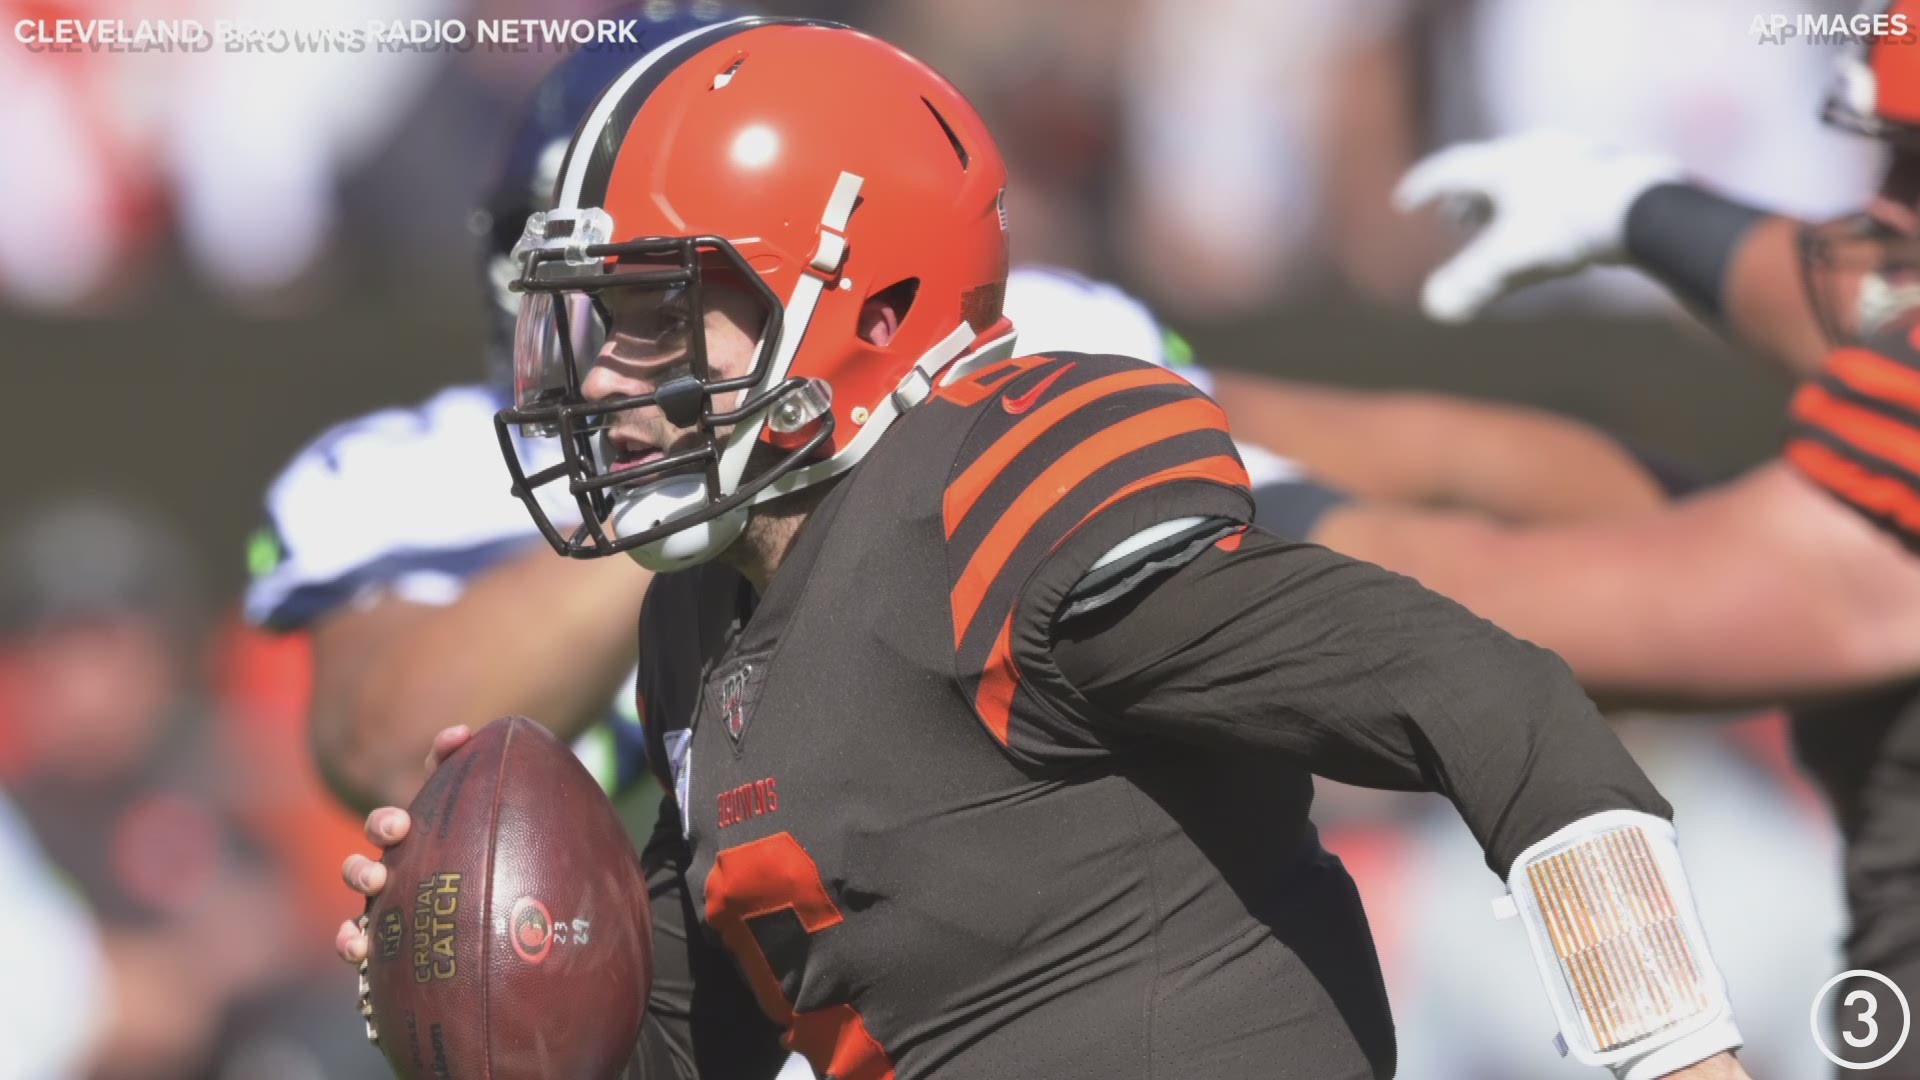 Baker Mayfield's first career rushing touchdown gave the Cleveland Browns a 14-6 lead over the Seattle Seahawks late in the first quarter at FirstEnergy Stadium.